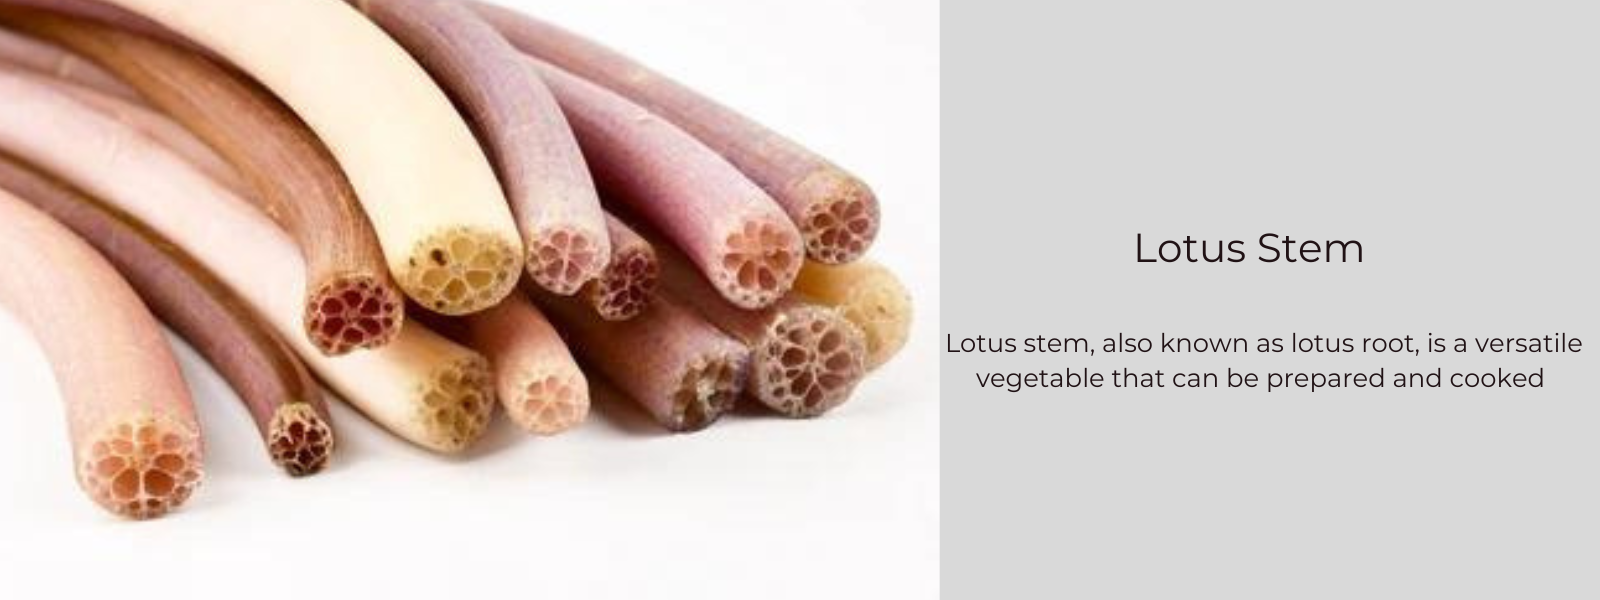 Lotus Stem - Health Benefits, Uses and Important Facts